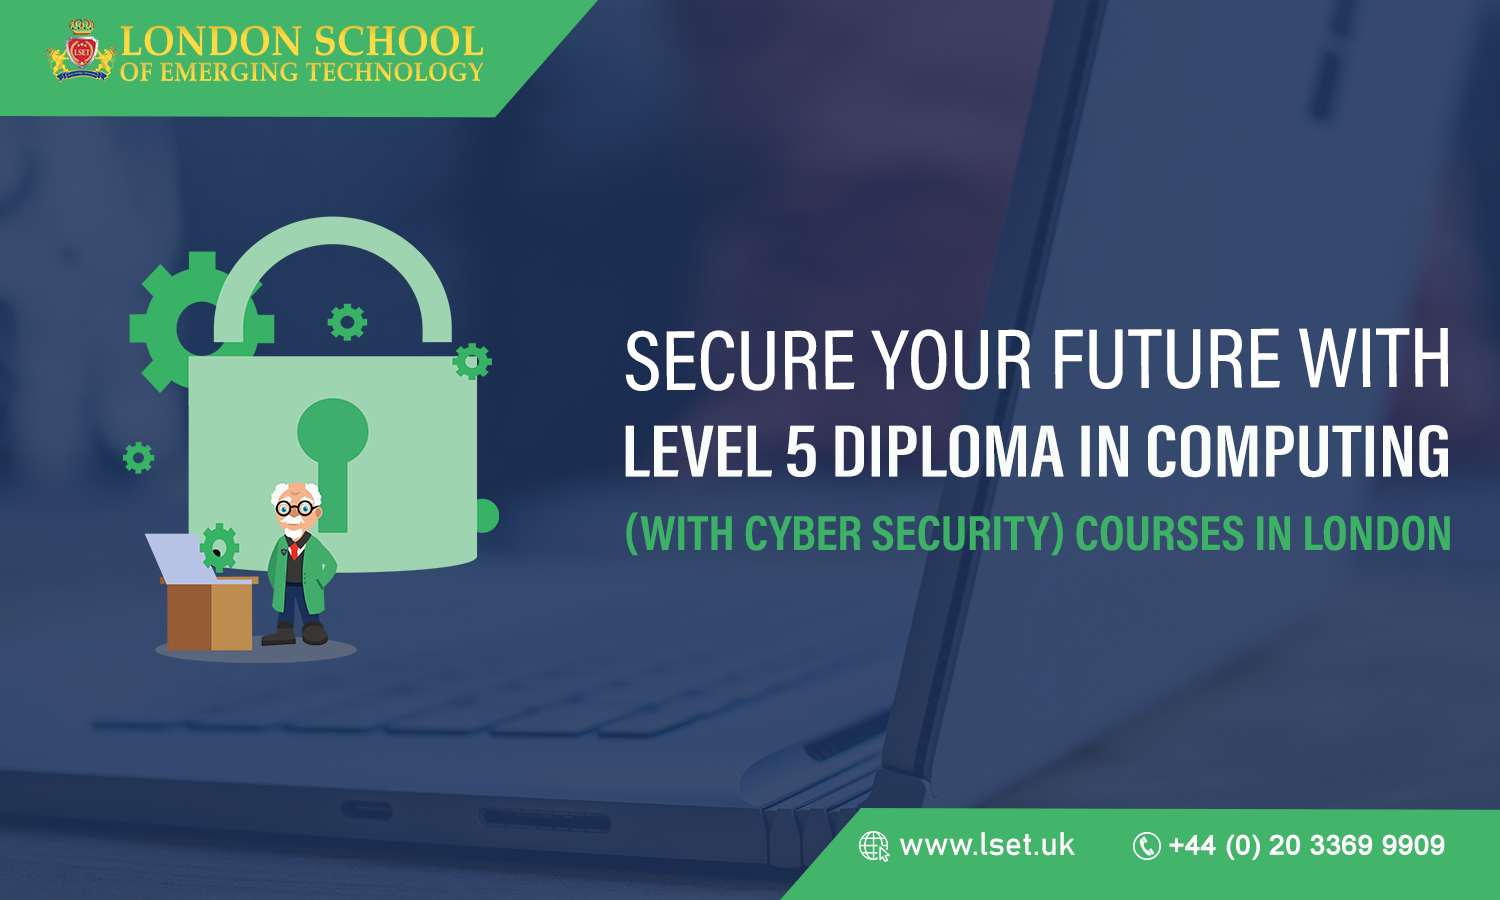 Secure Your Future with Level 5 Diploma in Computing (with Cyber Security) Courses in London 4.48.21 PM